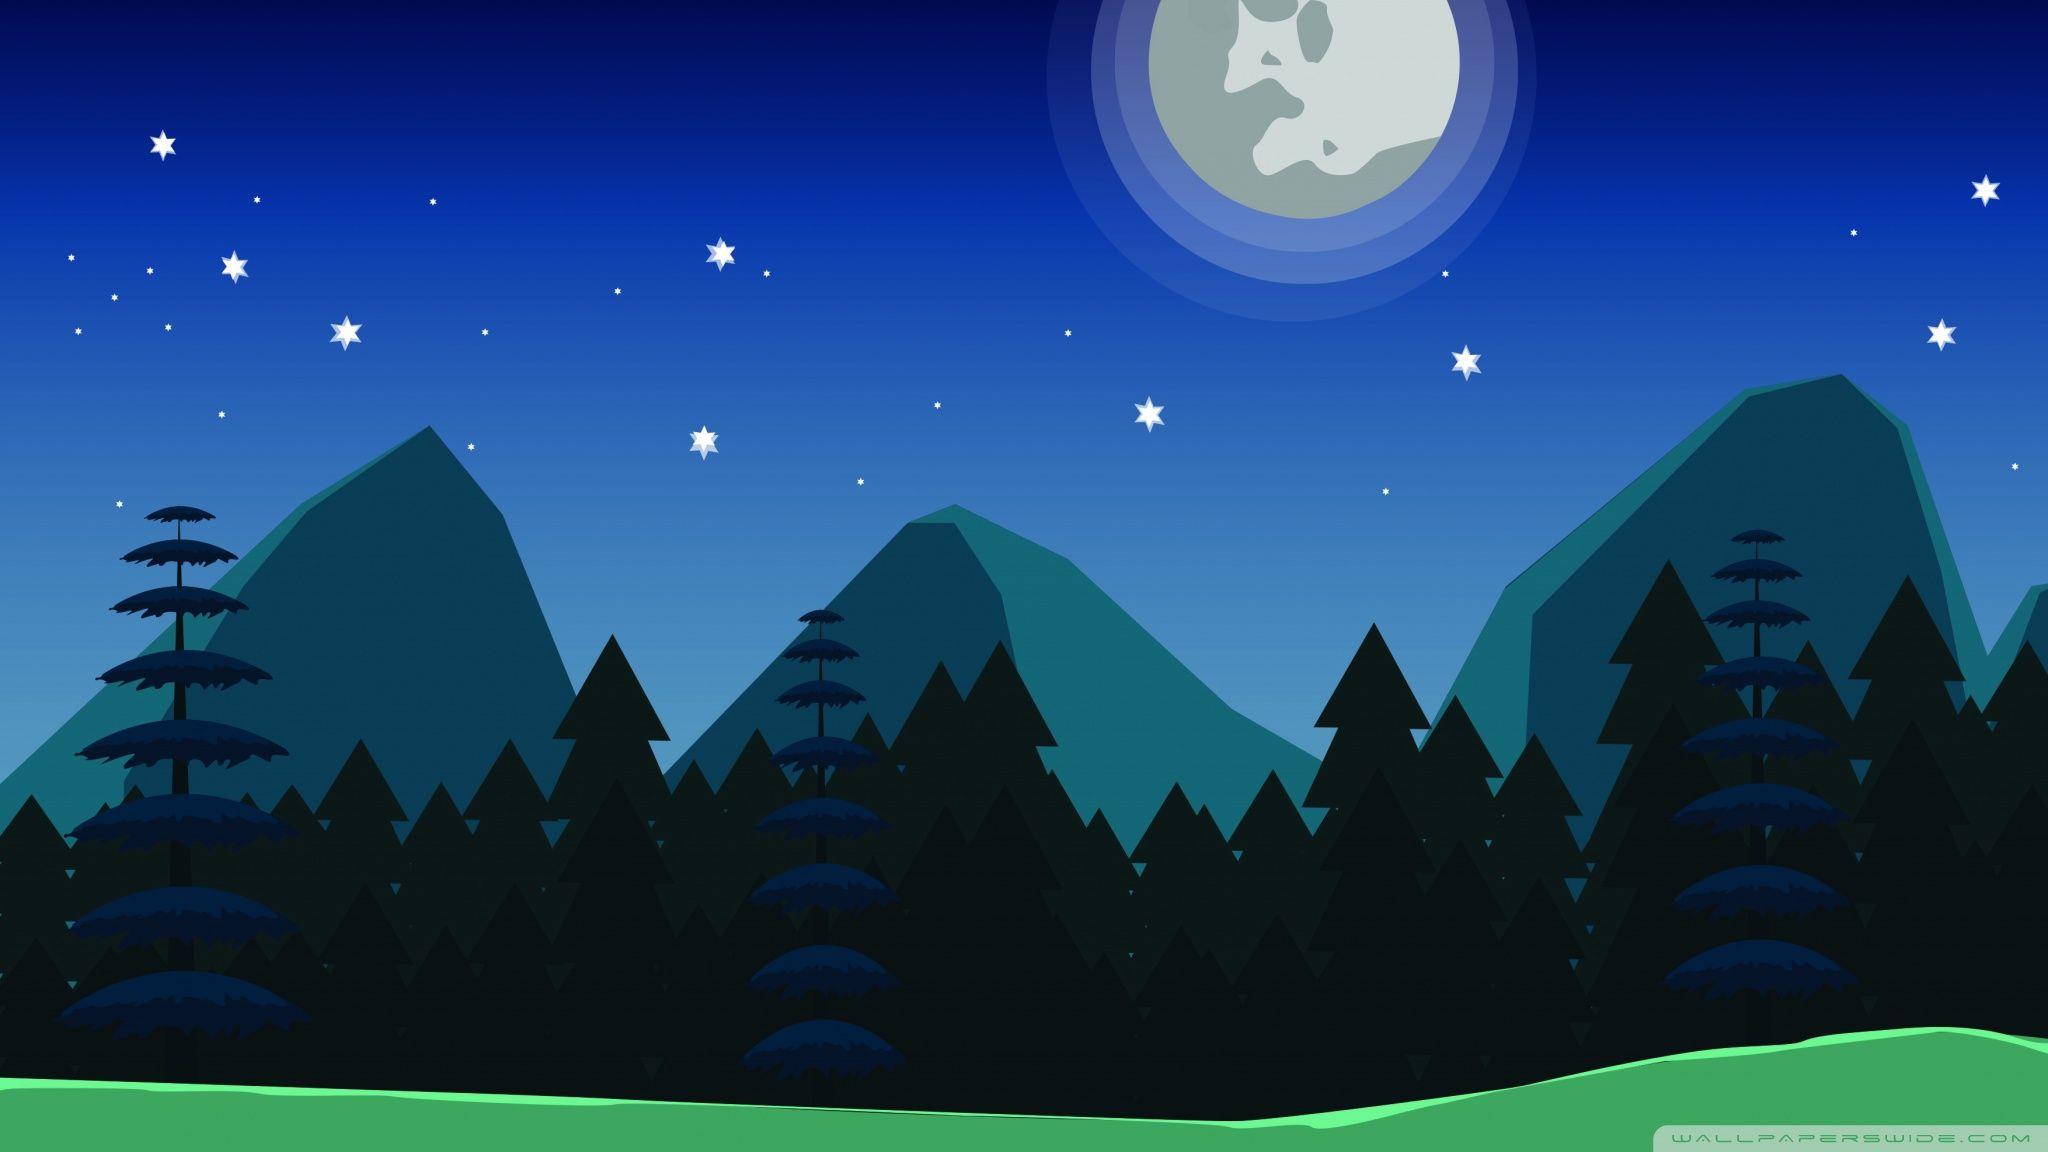 Forest Cartoon Wallpapers - Top Free Forest Cartoon Backgrounds